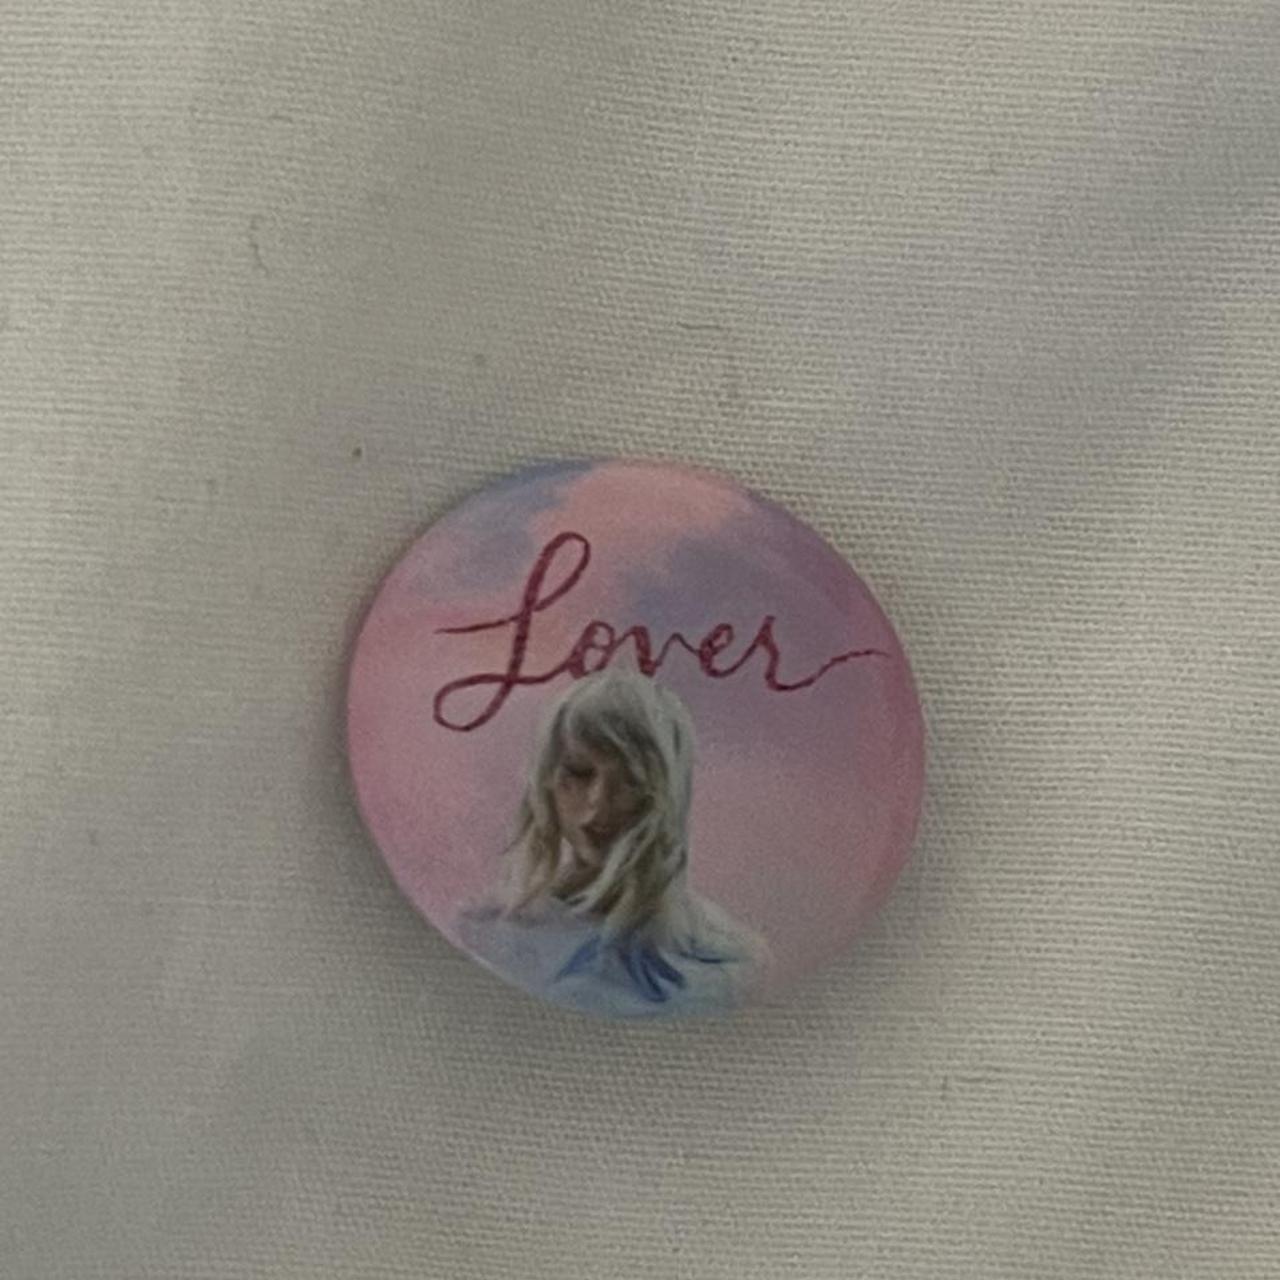 Taylor Swift Pins and Buttons for Sale